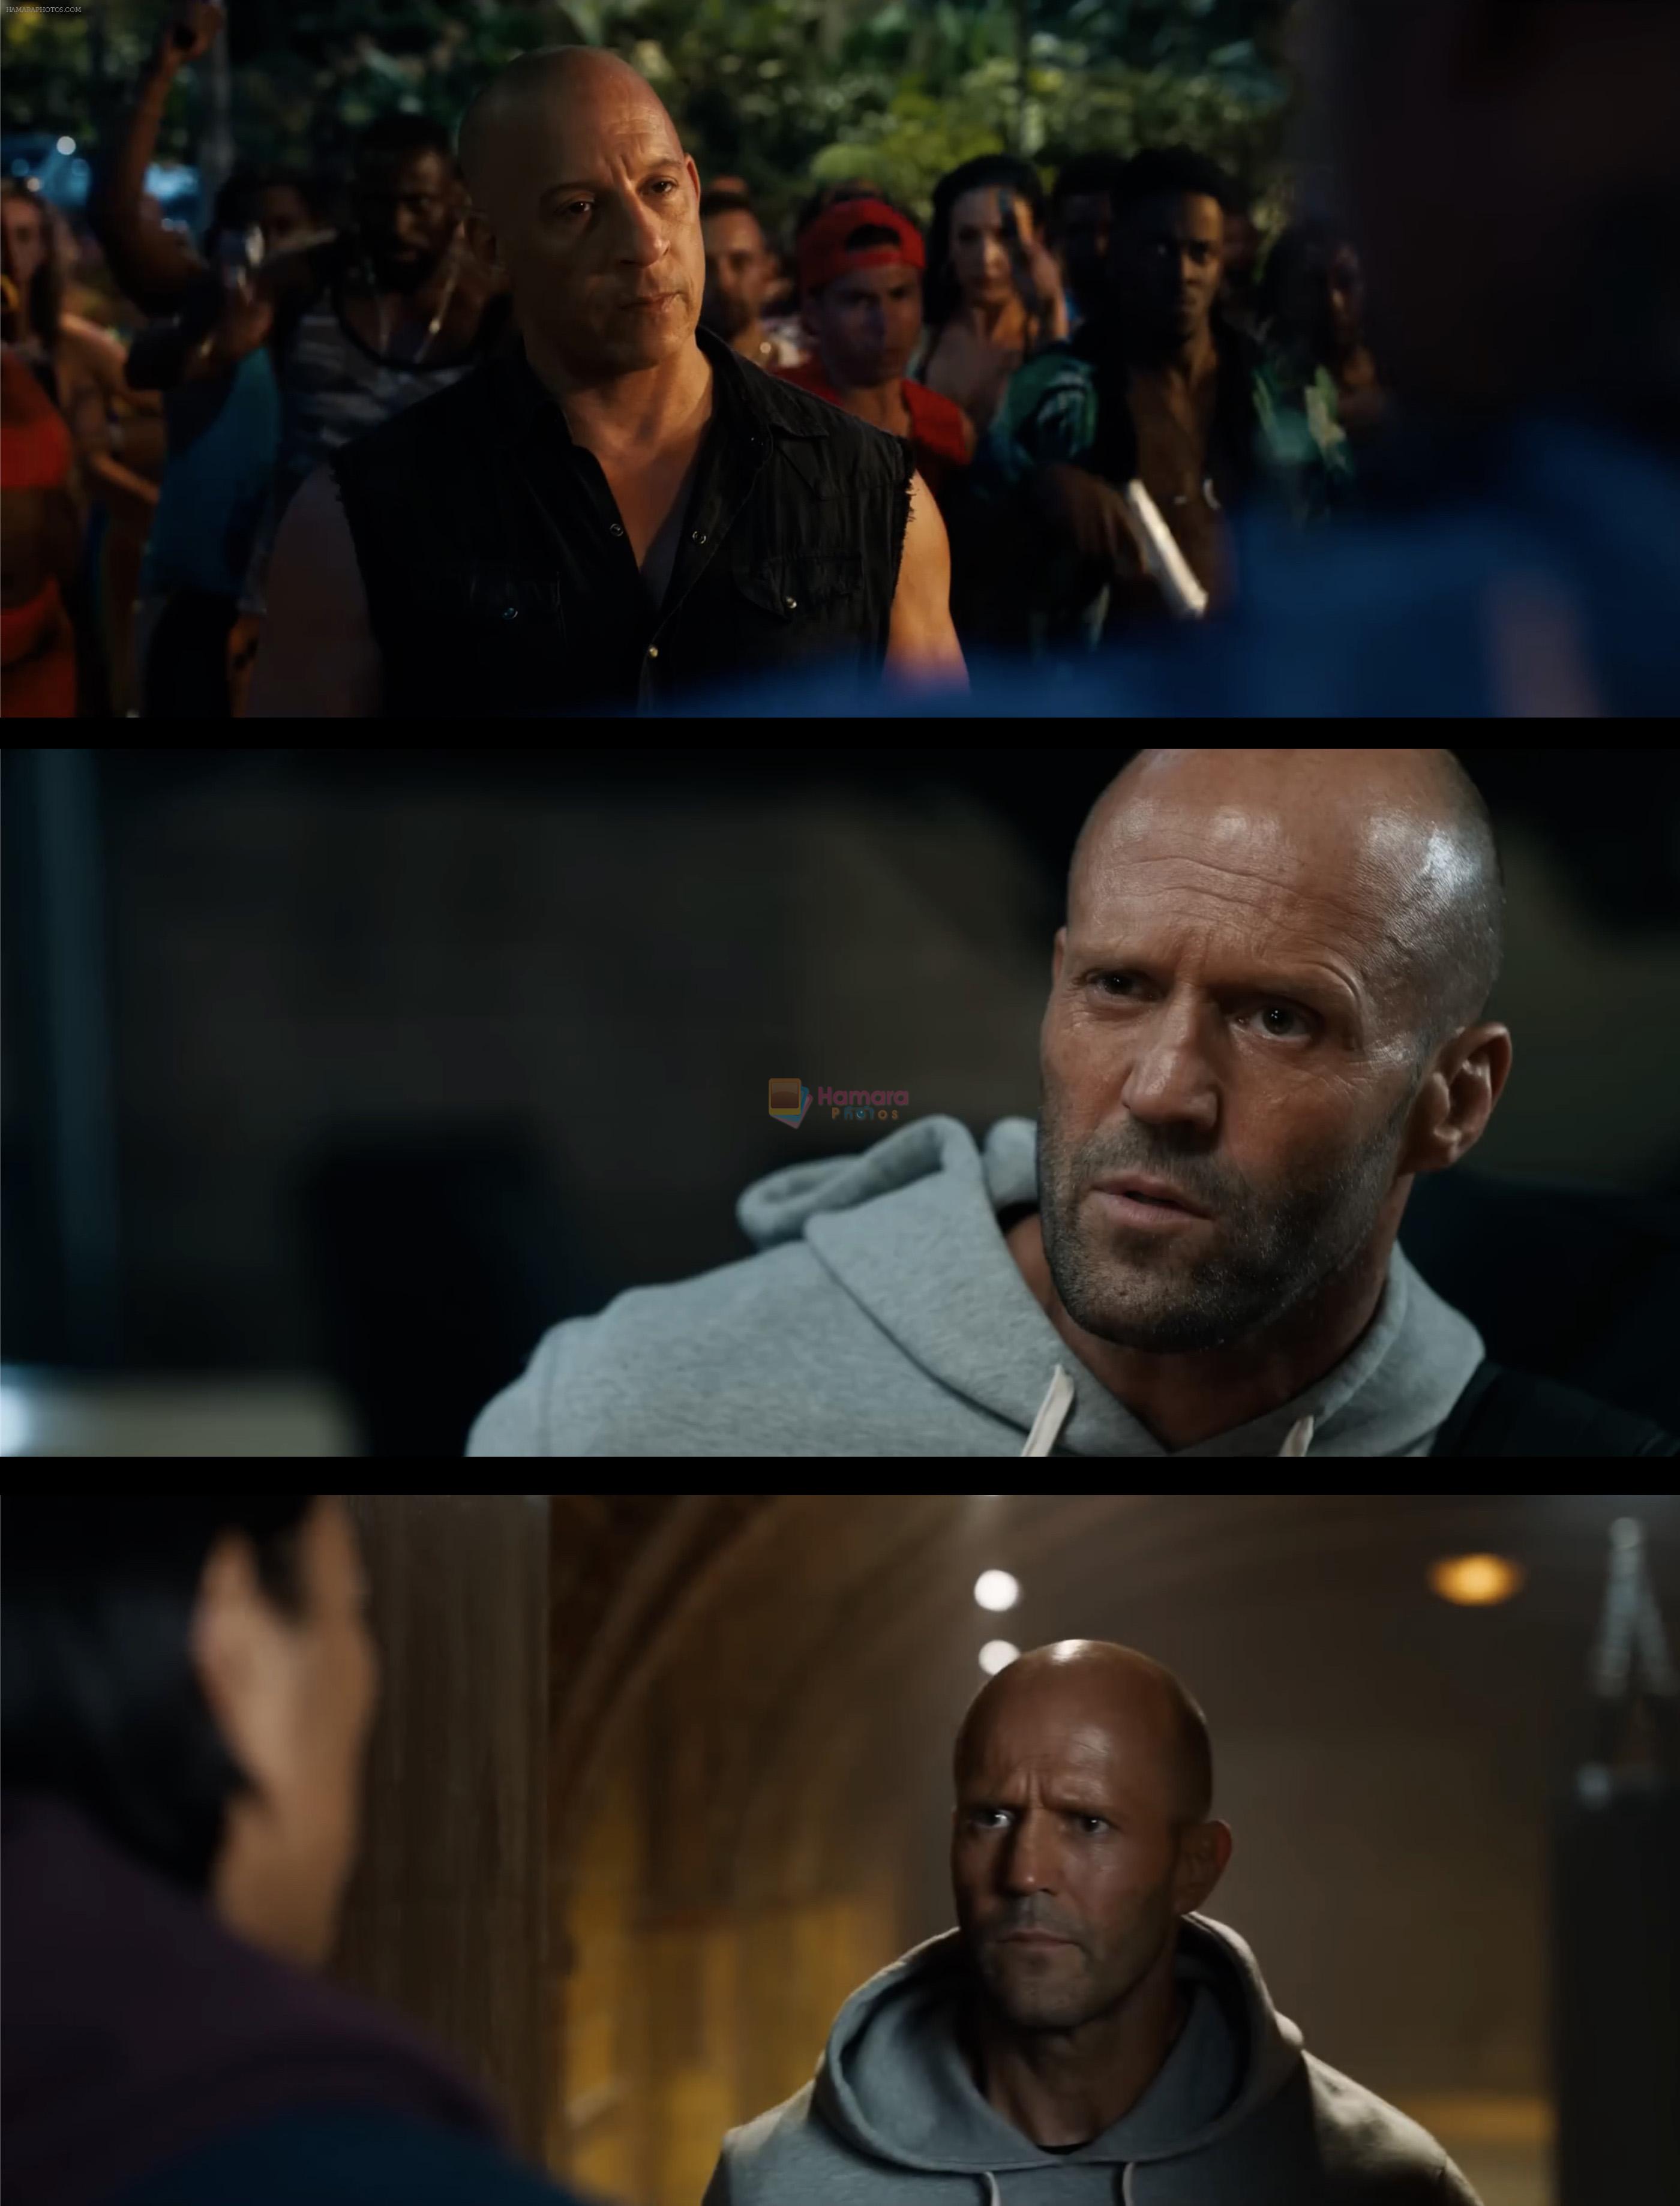 Vin Diesel as Dominic Toretto and Jason Statham as Shaw in Still from movie Fast X